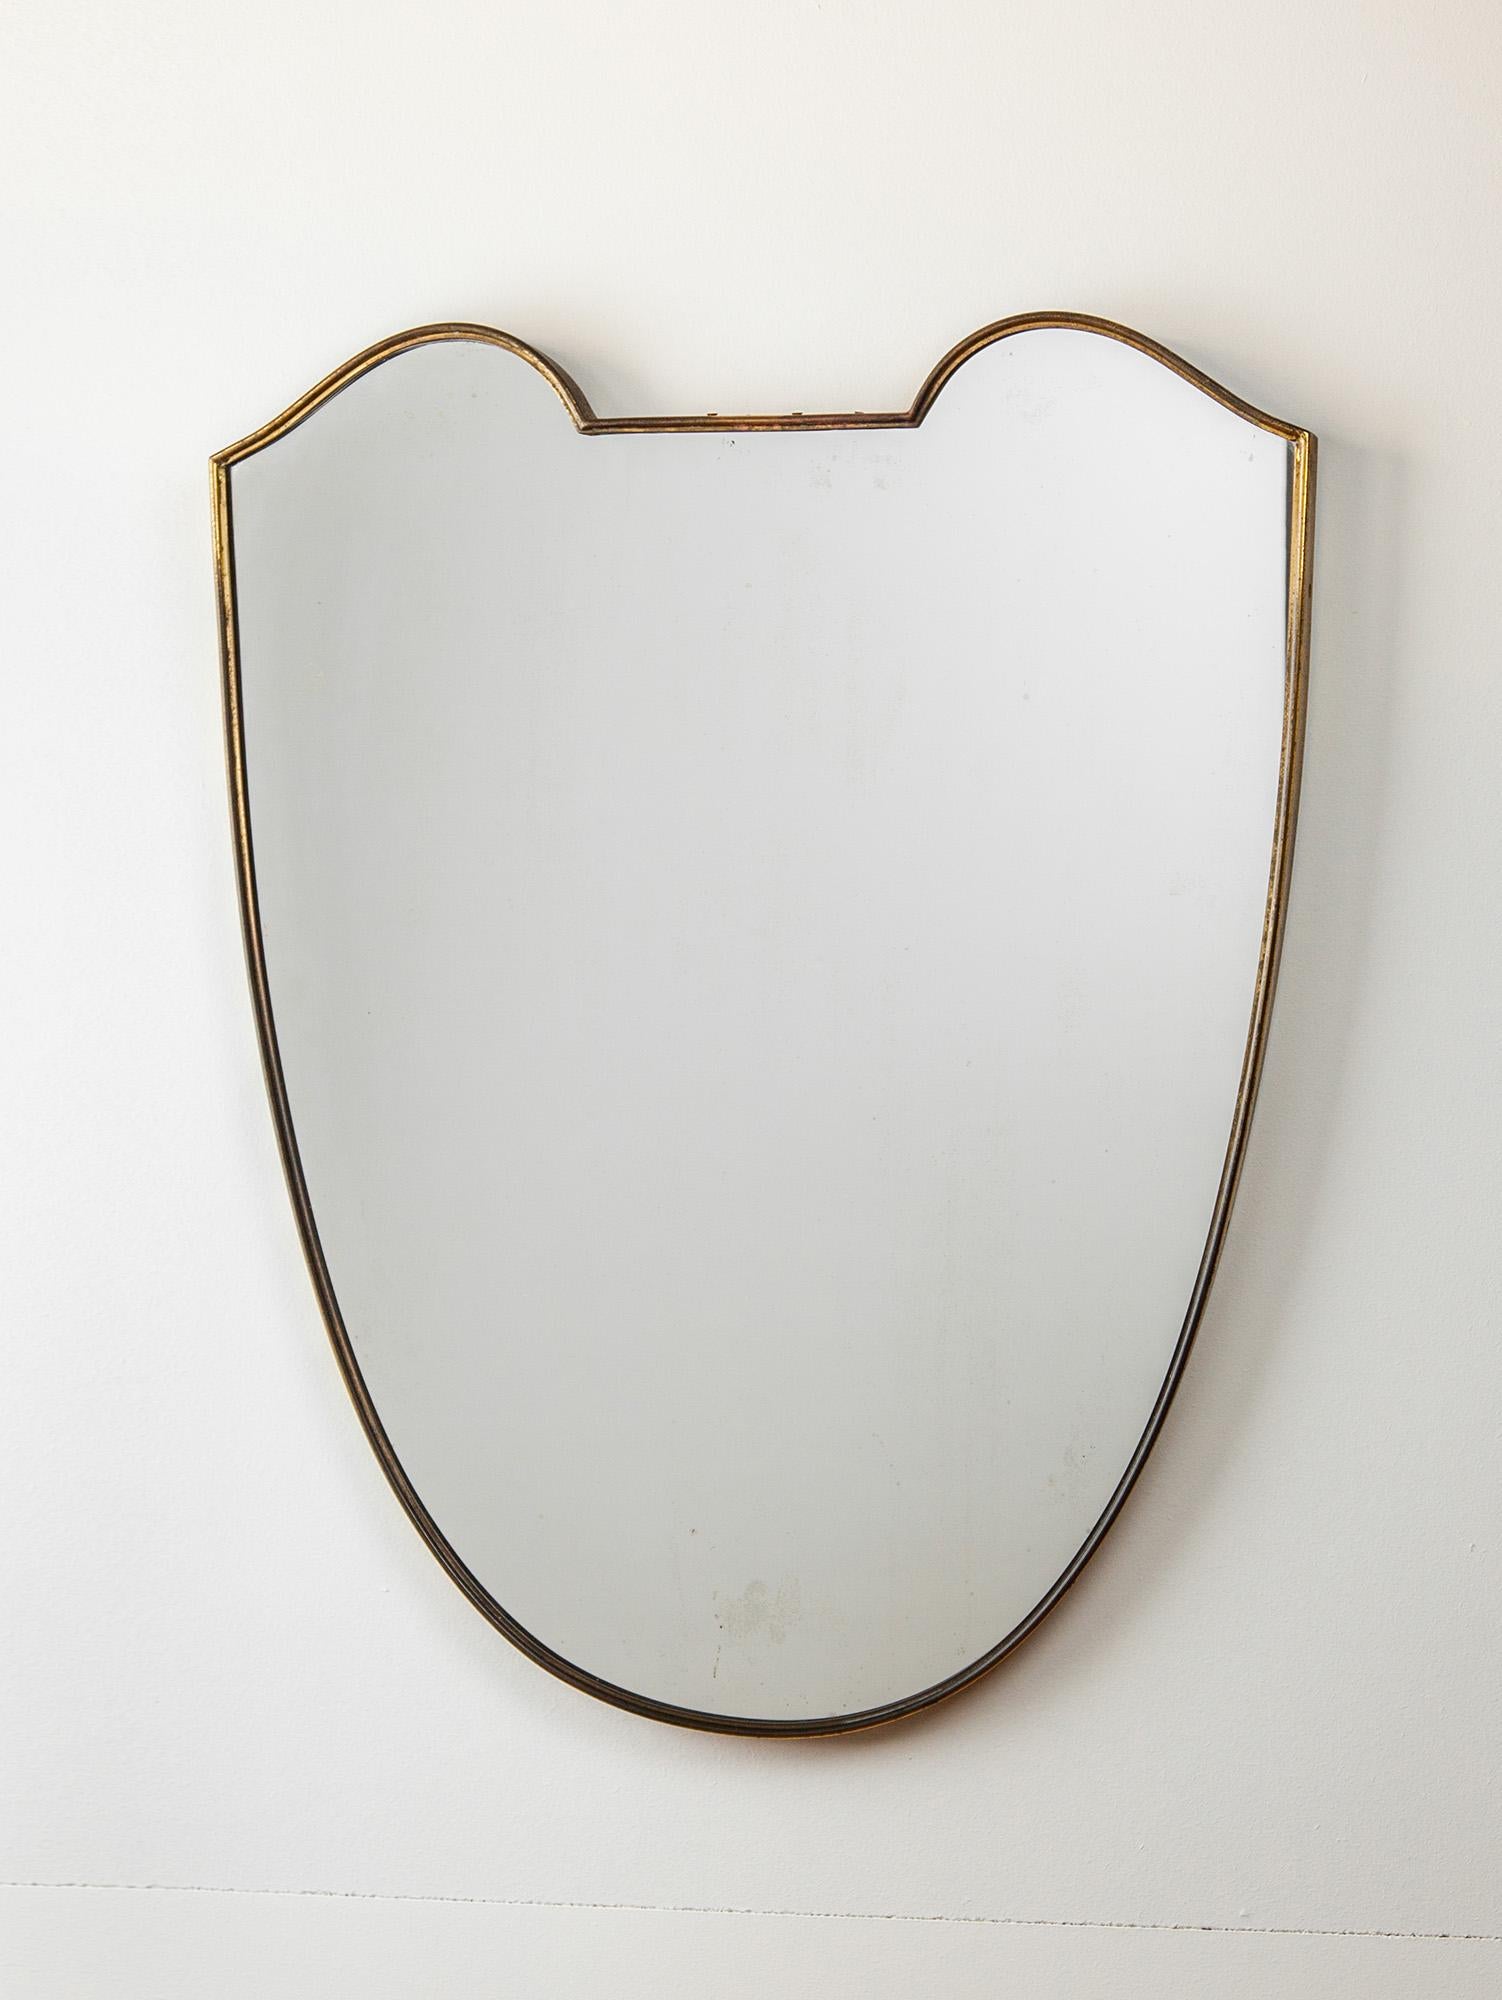 1950s Gio Ponti Style Brass Mirror, Italy For Sale 1